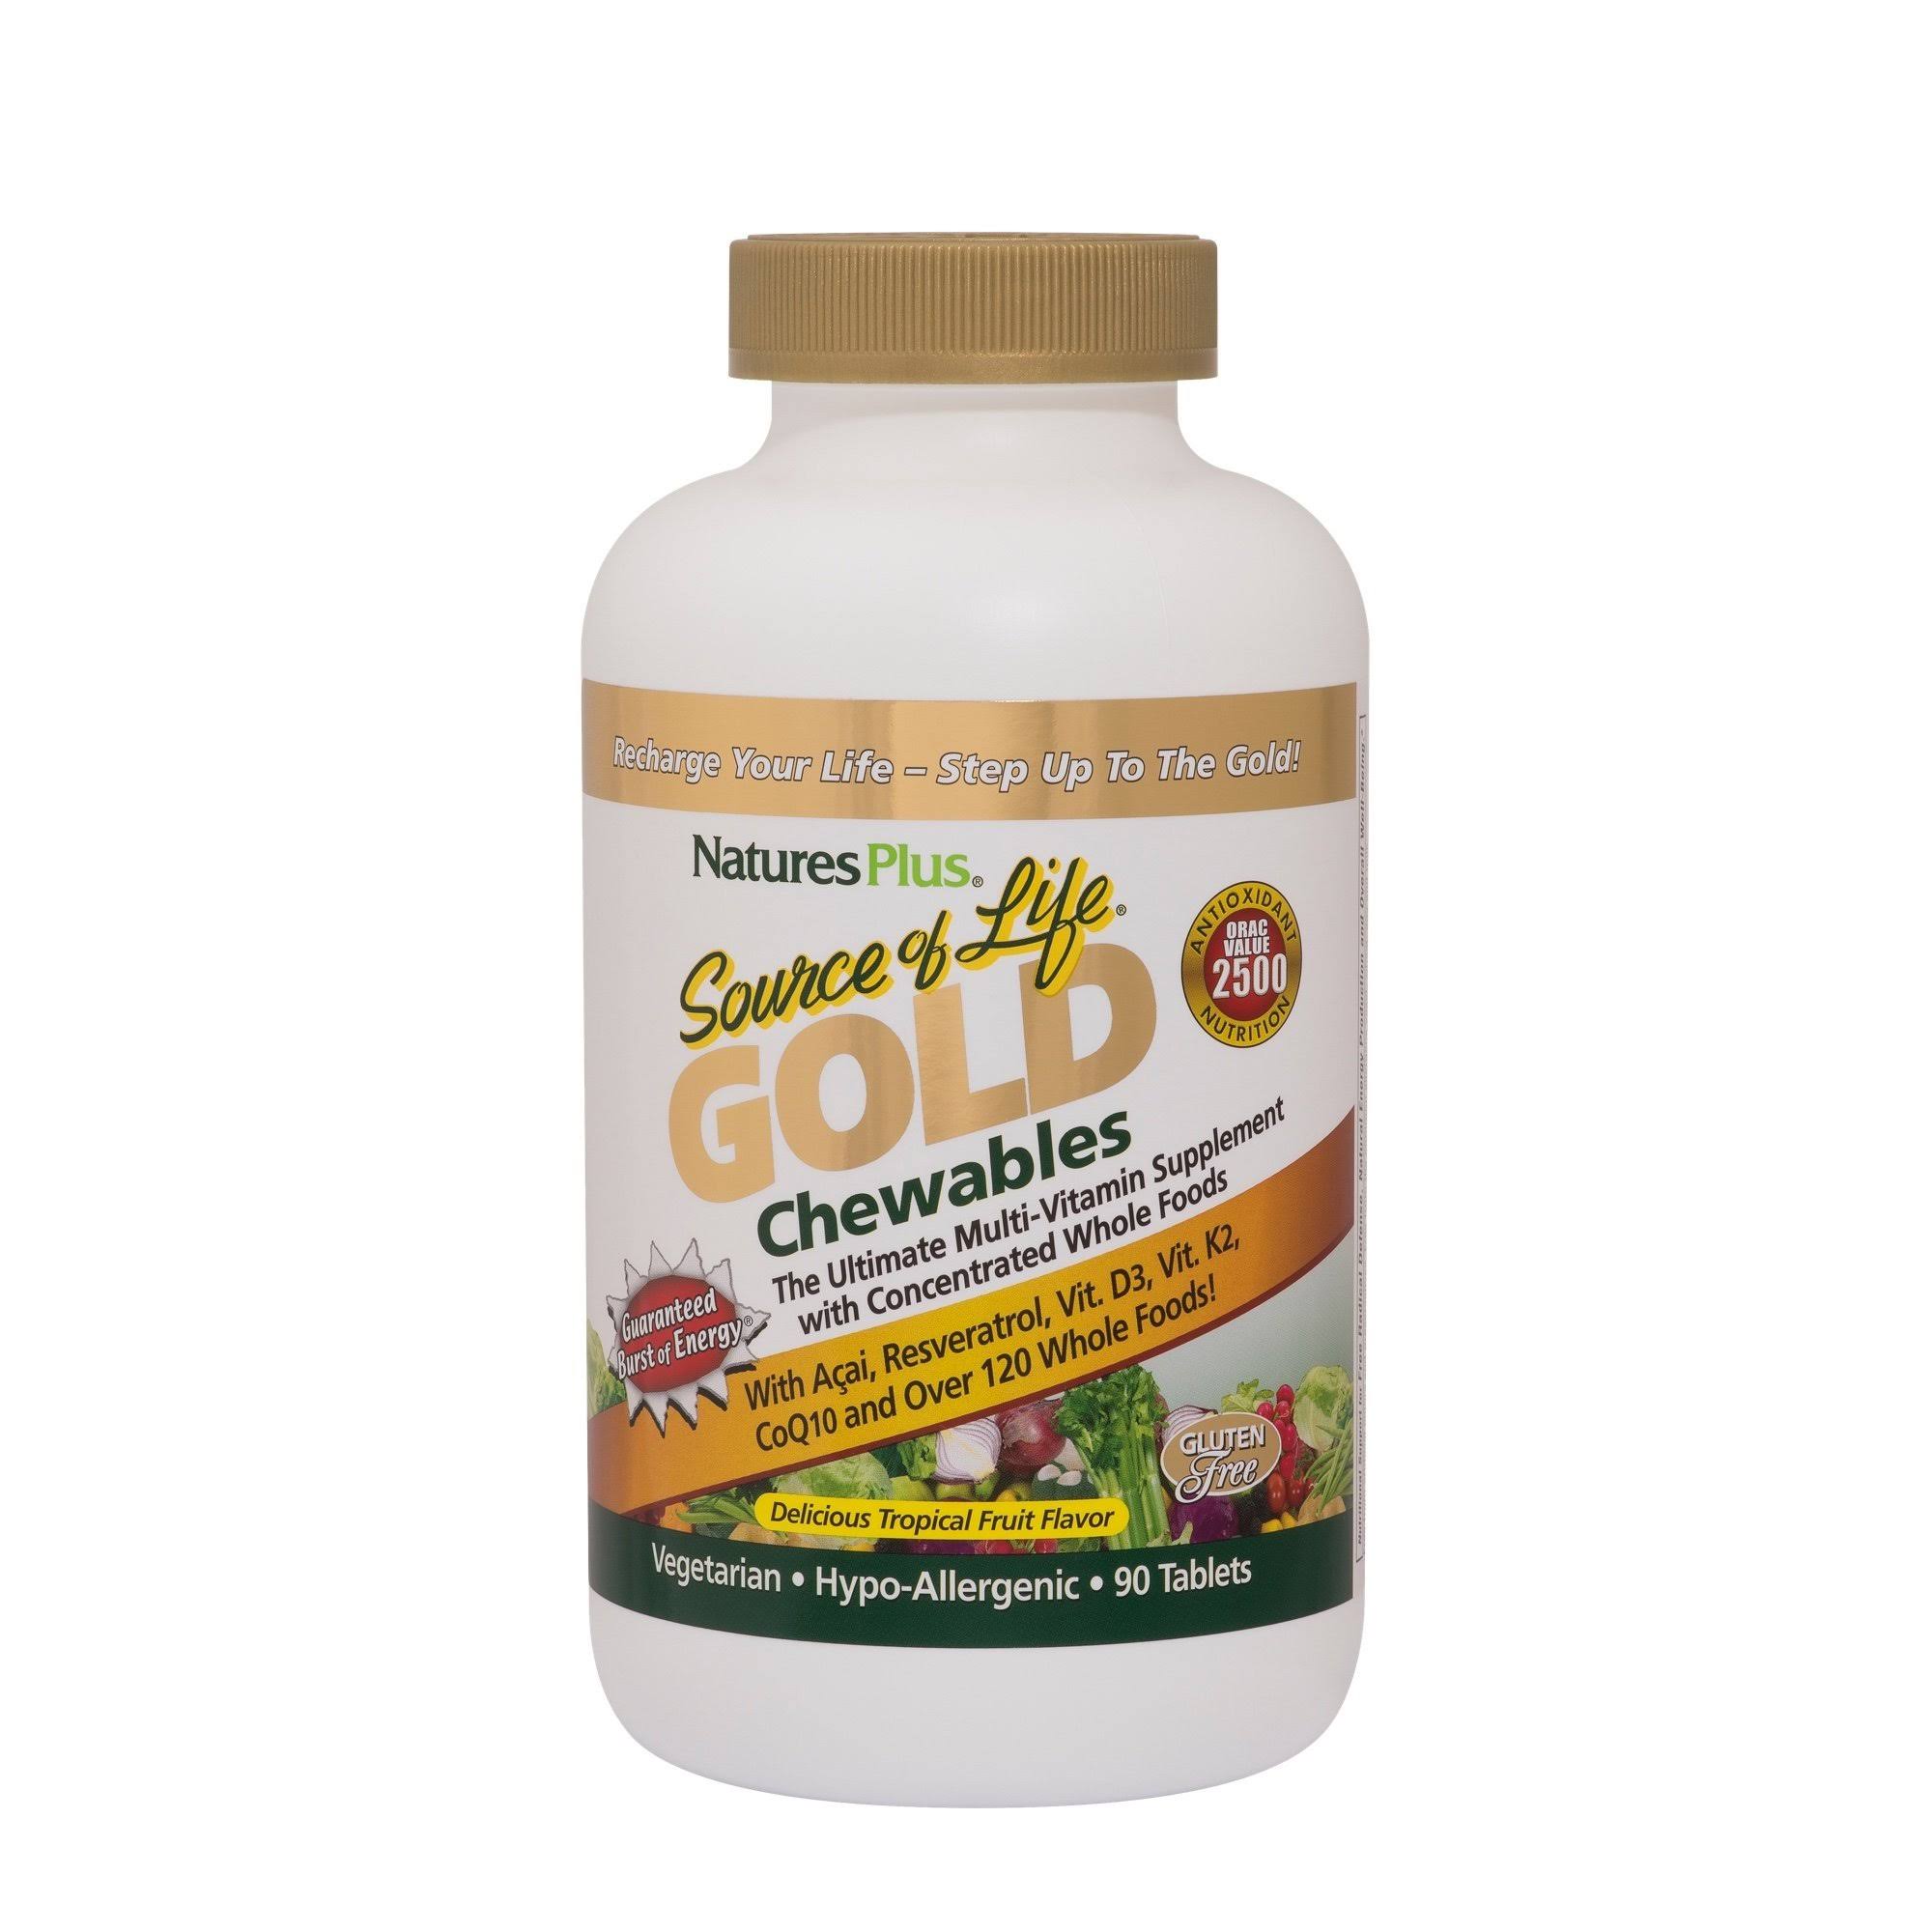 Nature's Plus Source of Life Gold Chewables, Tropical Fruit, 90